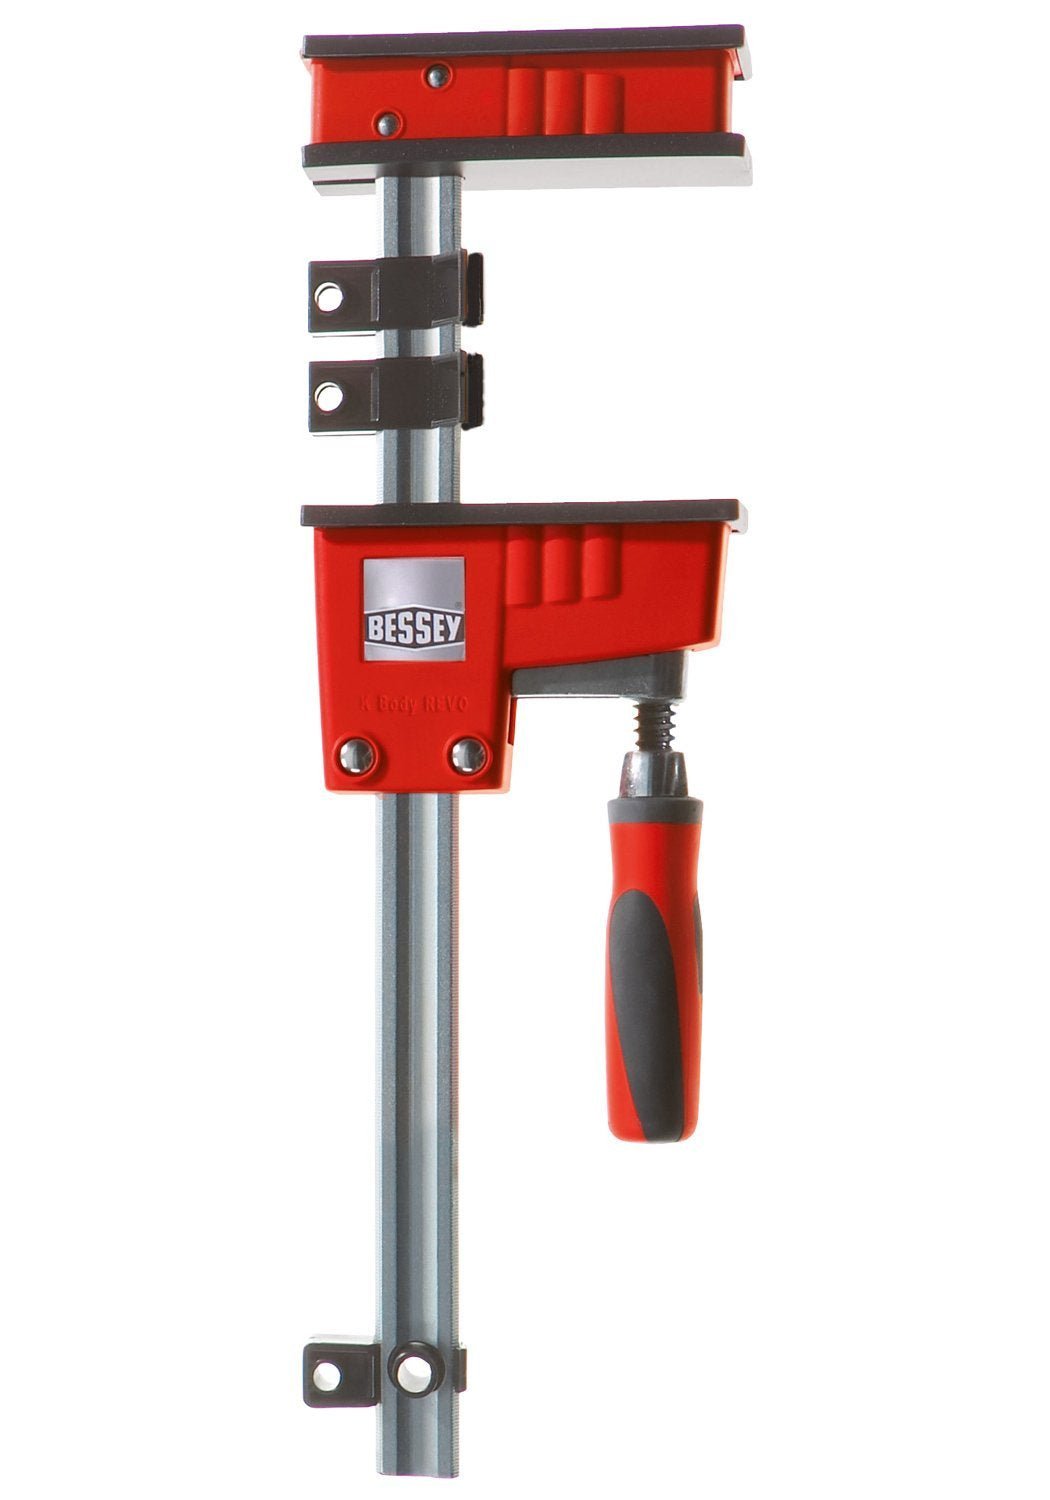 Bessey KR3.540 40-inch K Body REVO Fixed Jaw Parallel Clamp